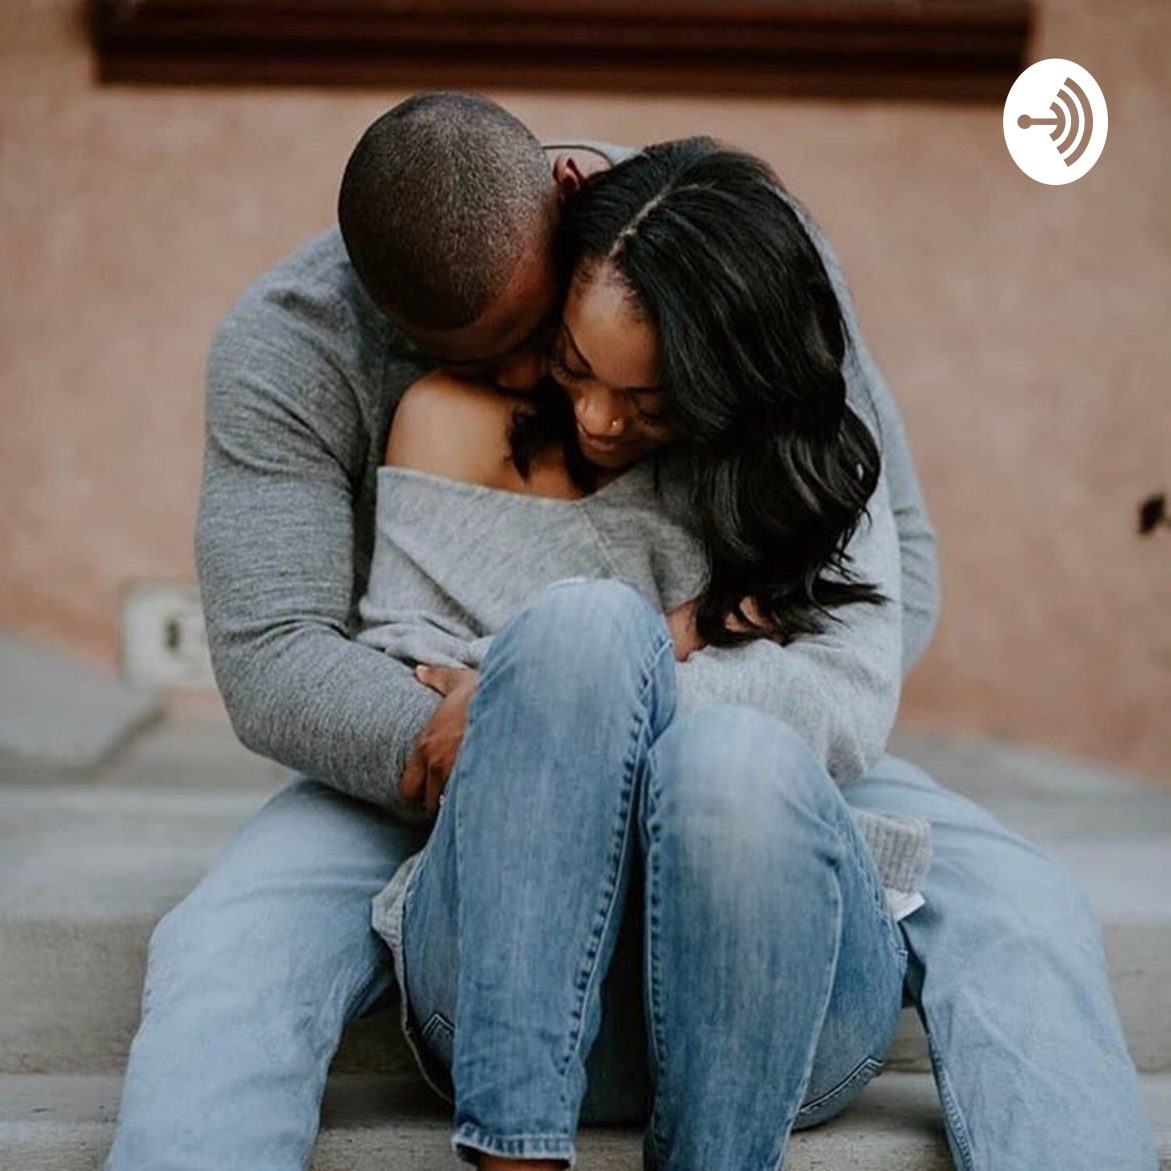 Black Podcasting - Dating Dilemma - He’s No Longer Attracted to Me